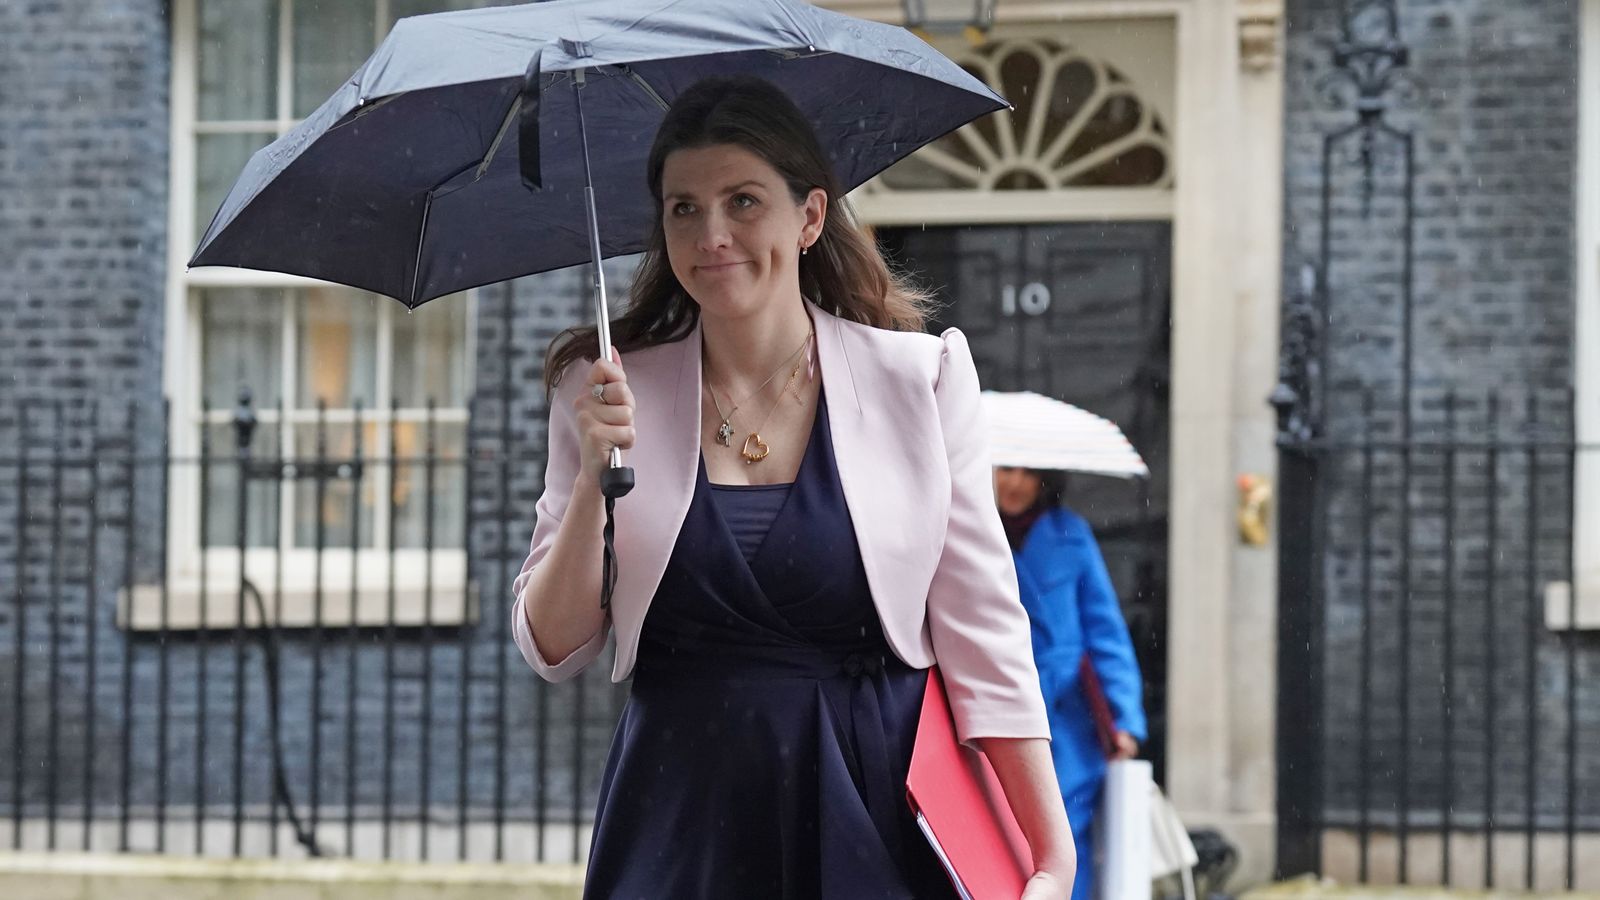 Michelle Donelan: Science secretary apologises after false Hamas claims about academic led to taxpayers footing £15,000 libel bill